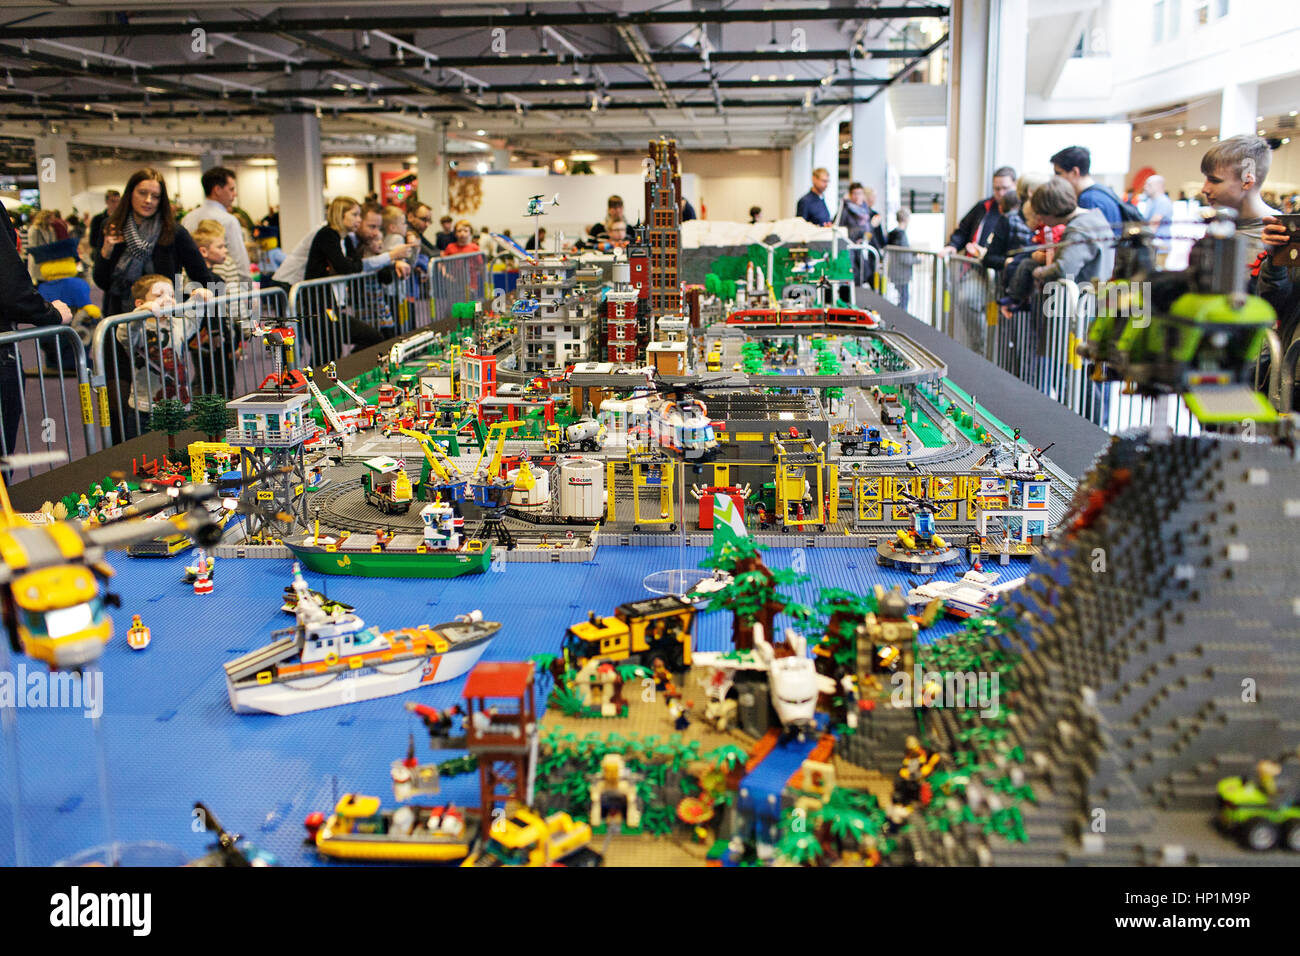 Copenhagen, Denmark. 17th Feb, 2017. Children and adults of all ages go  crazy at the annual LEGO World event in Bella Center Copenhagen. The LEGO  Group is the largest toy company by